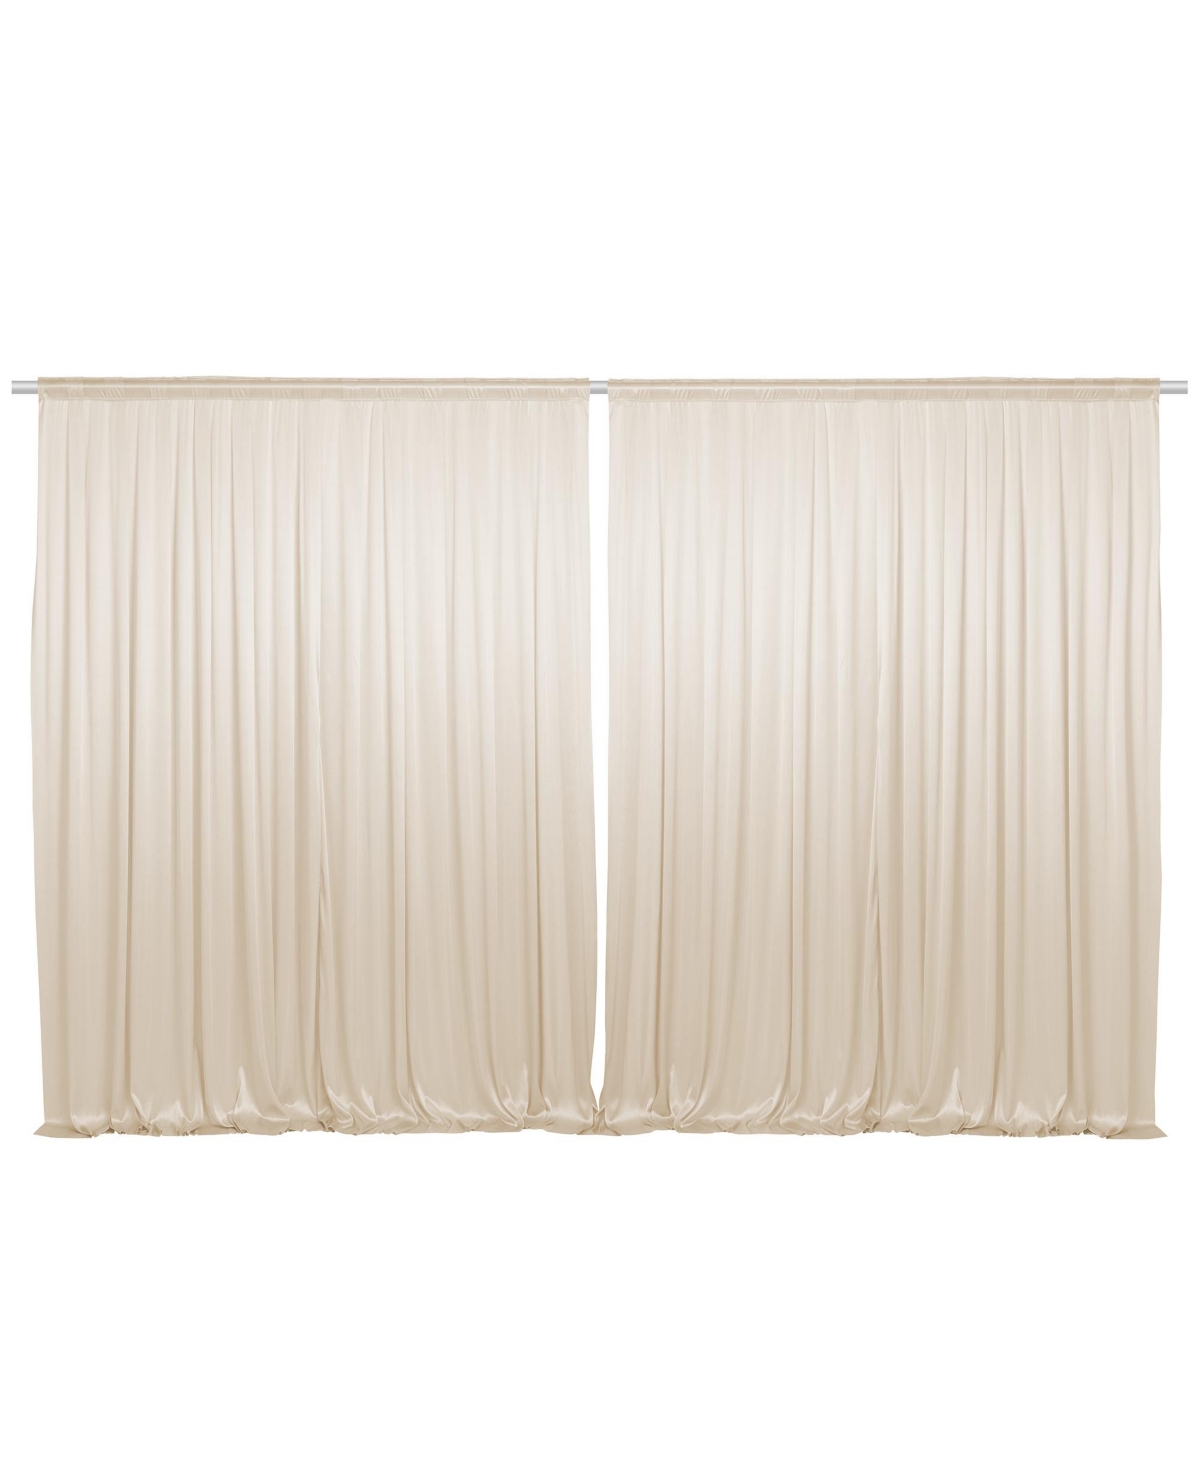 Set of 2 Photography Backdrop Curtains, 5ft x 7ft Ivory Wedding Photo Background - Open miscellaneous